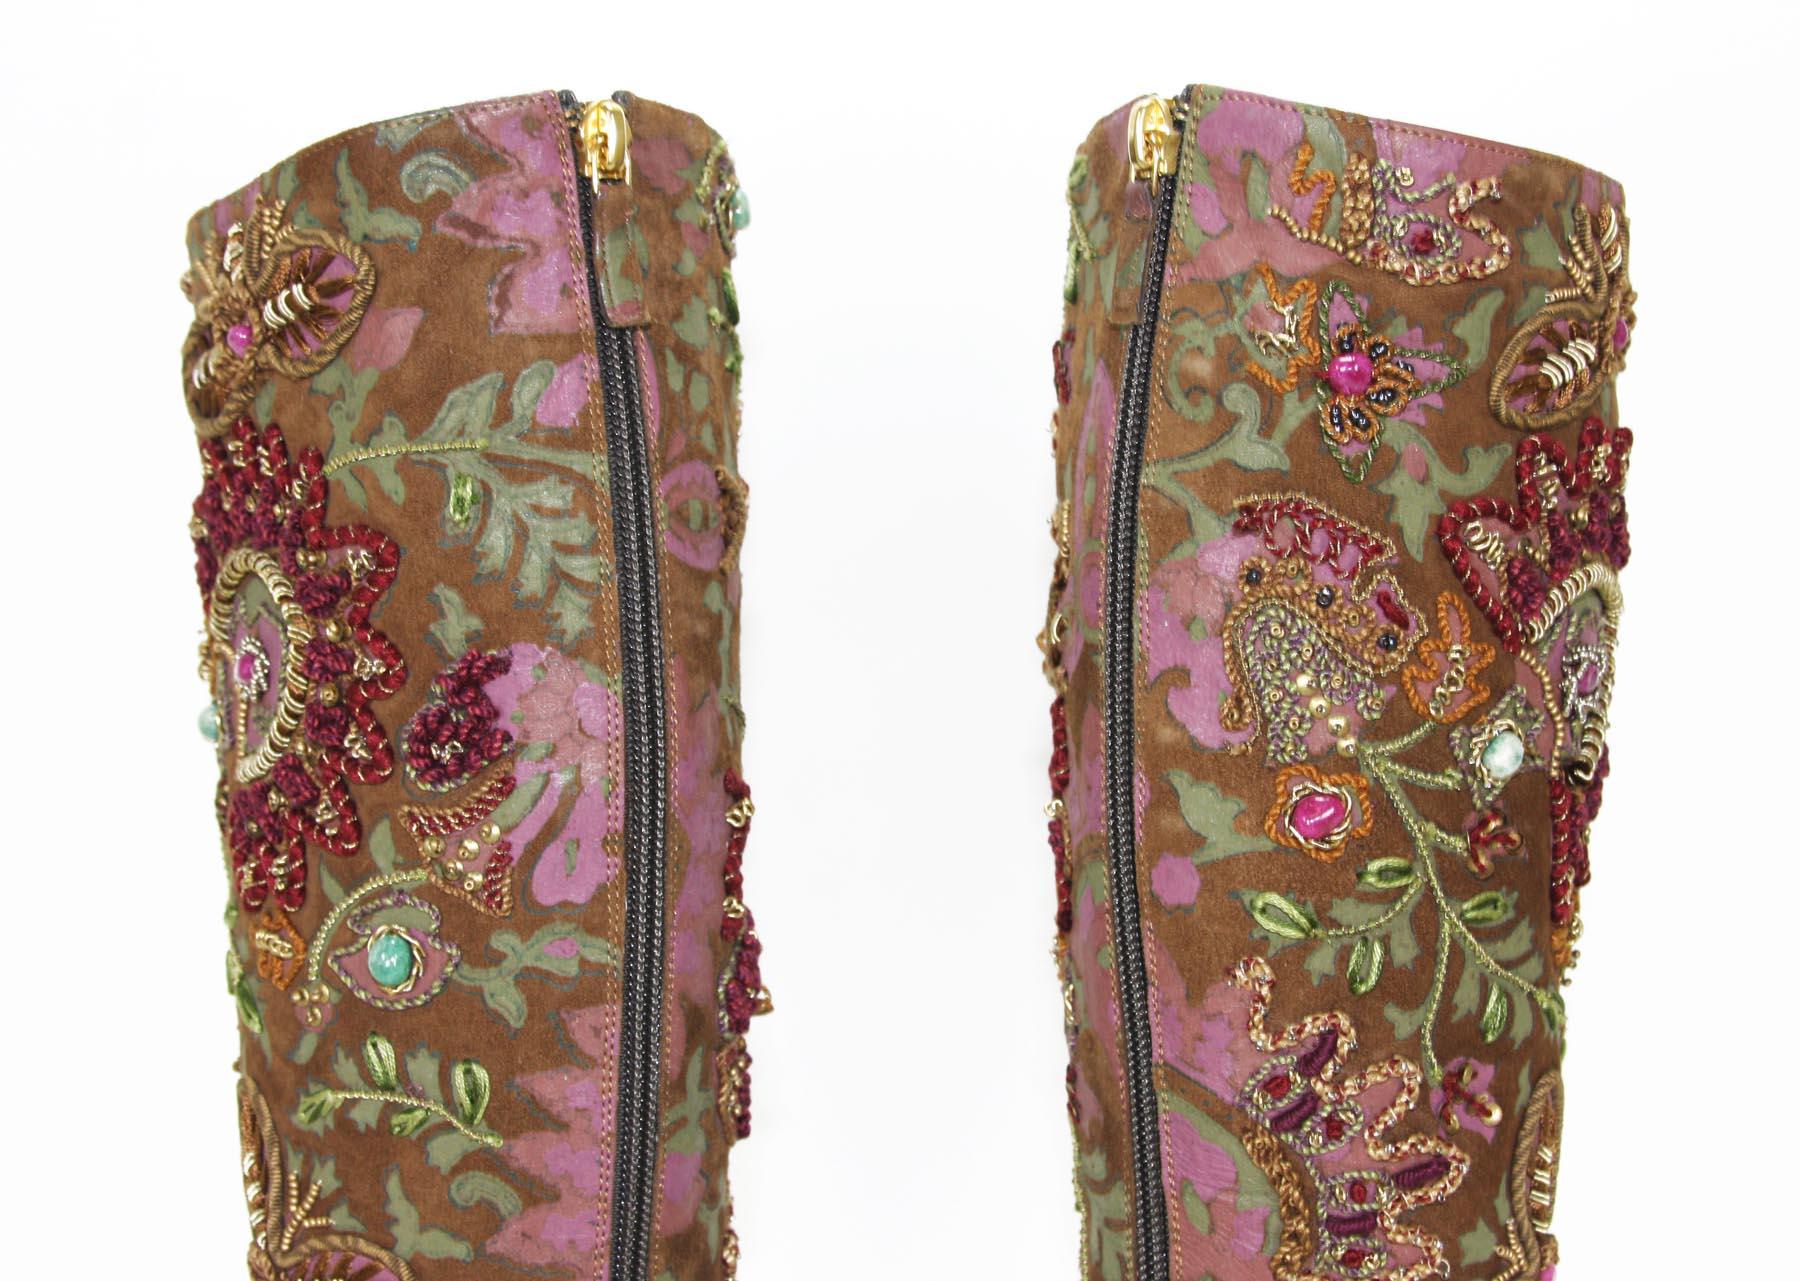 New Oscar De La Renta F/W 2004 Hand Painted Embroidered Boots 36.6 - US 6.5 For Sale 1